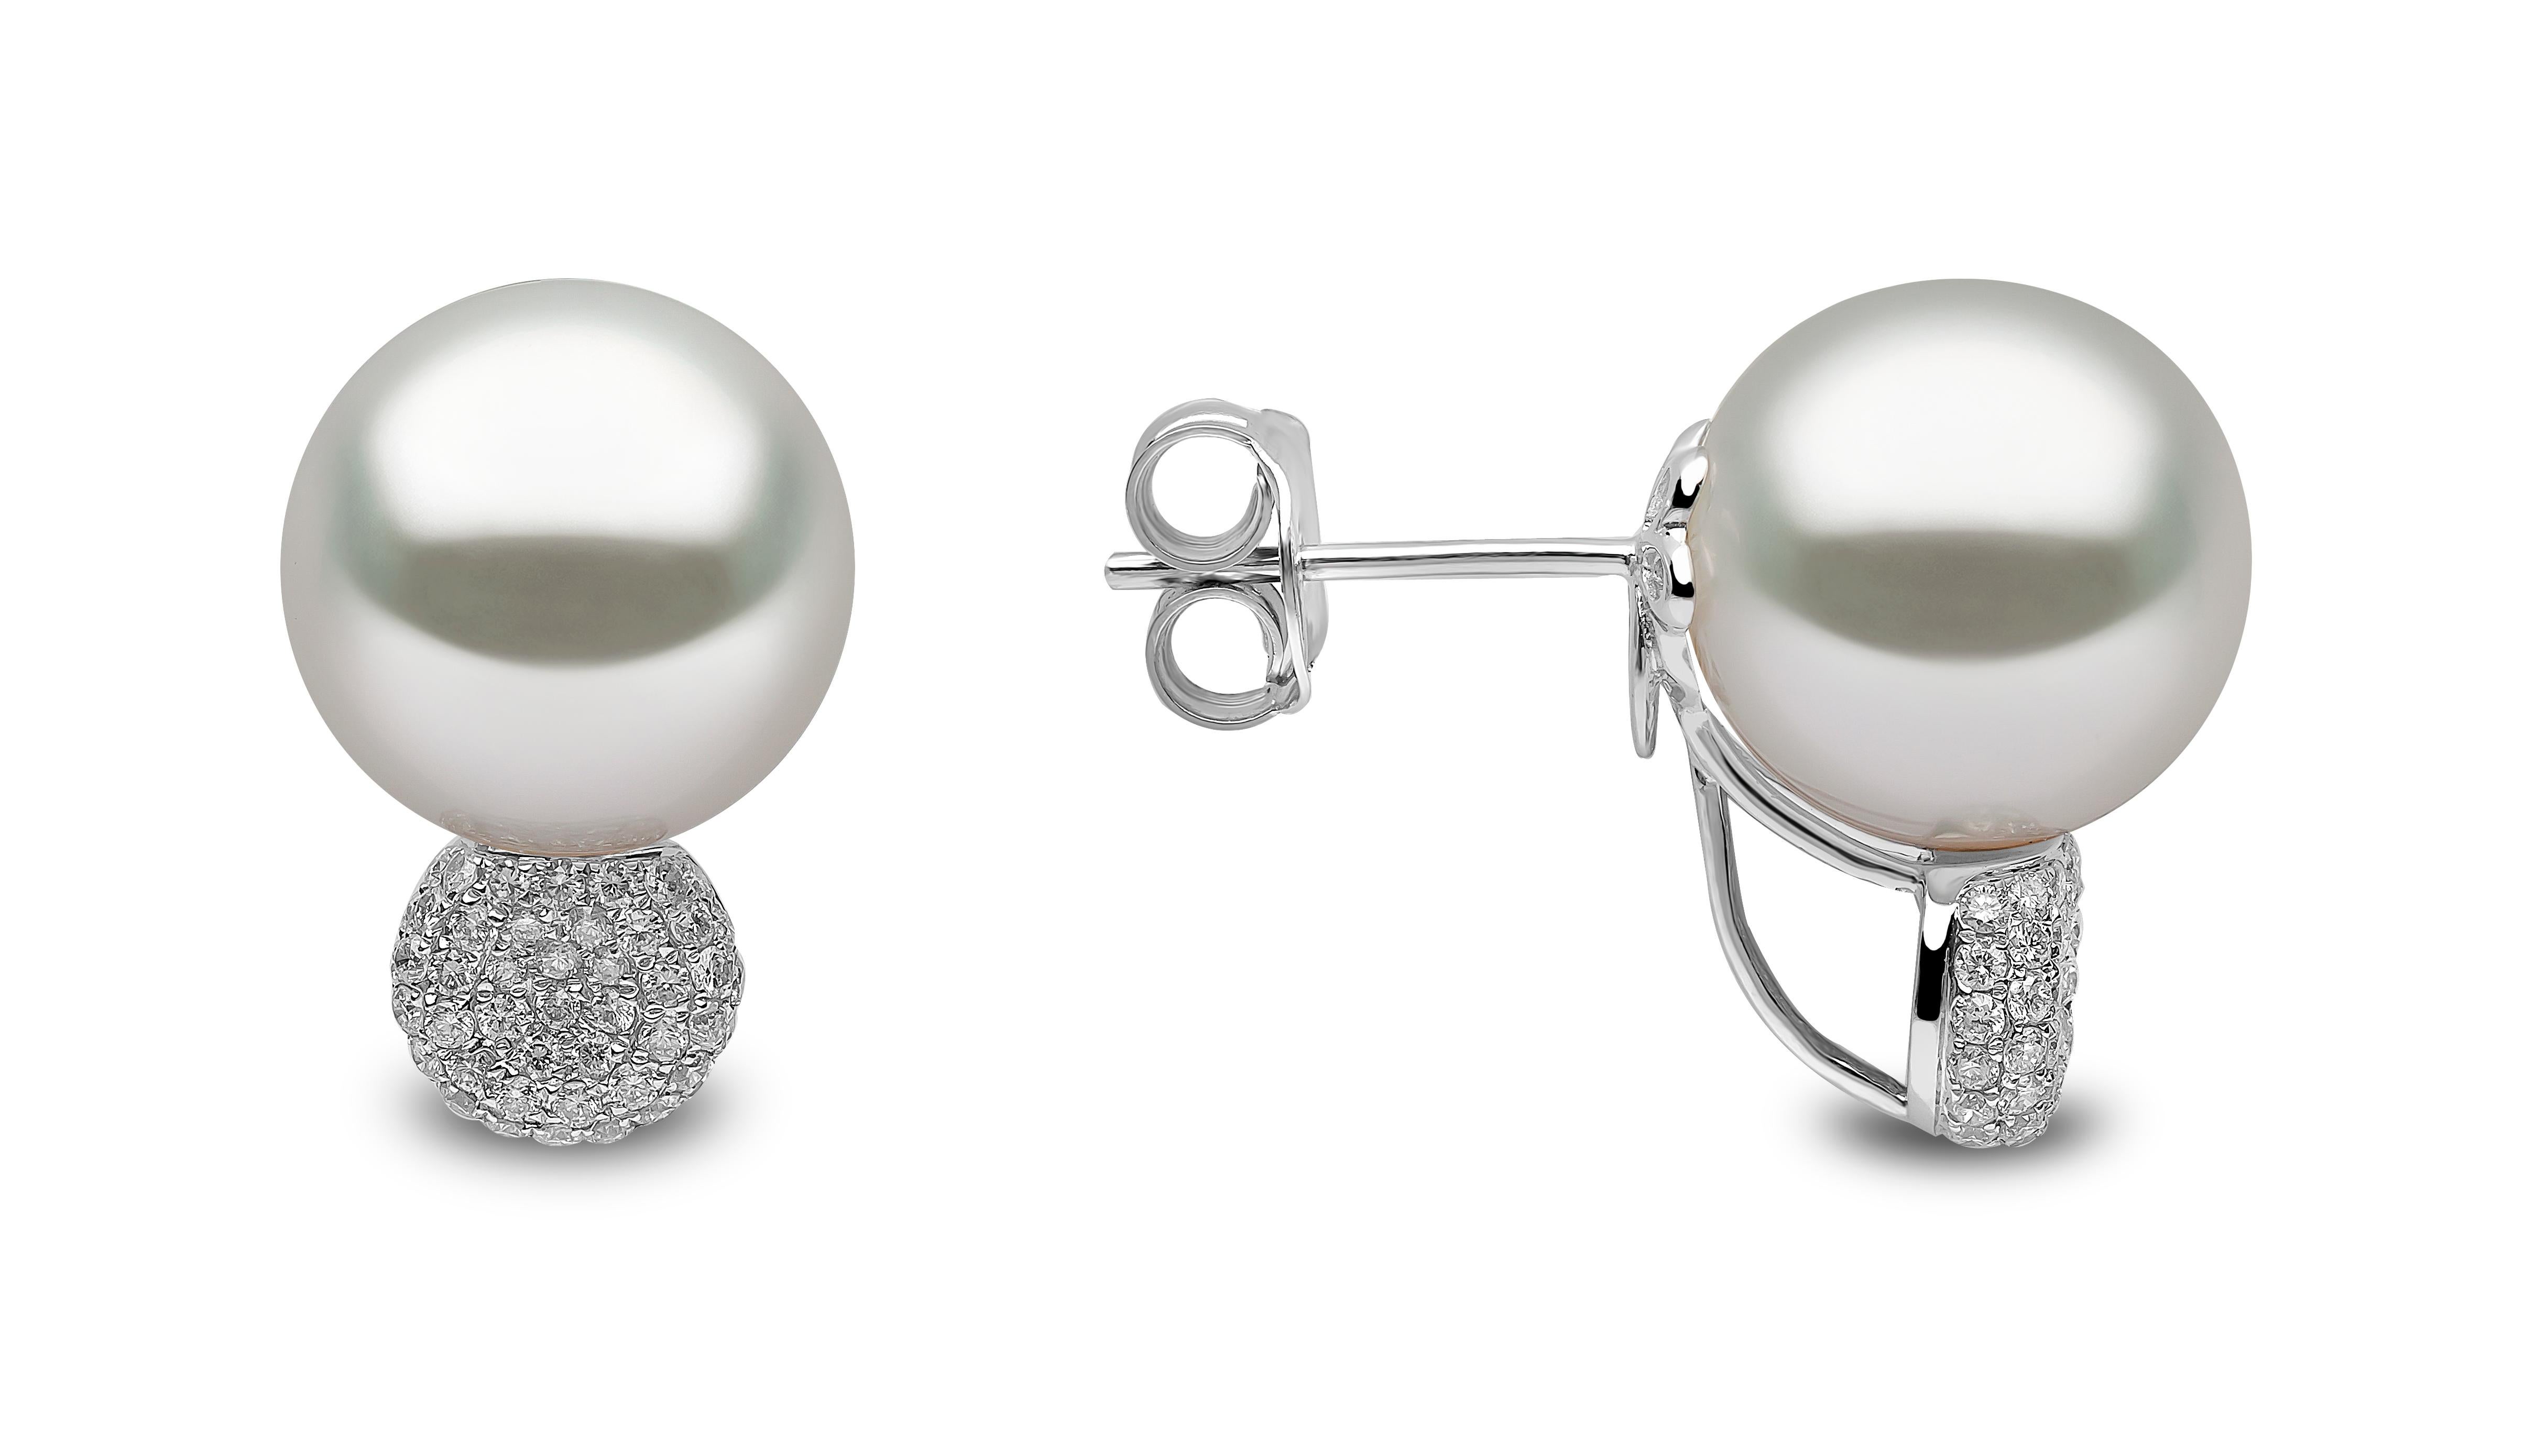 These elegant earrings by Yoko London feature lustrous South Sea pearls atop a cluster of dazzling diamonds. Set in 18 Karat white gold to enrich the radiance of both the pearls and the diamonds, these earrings utilise a classically beautiful